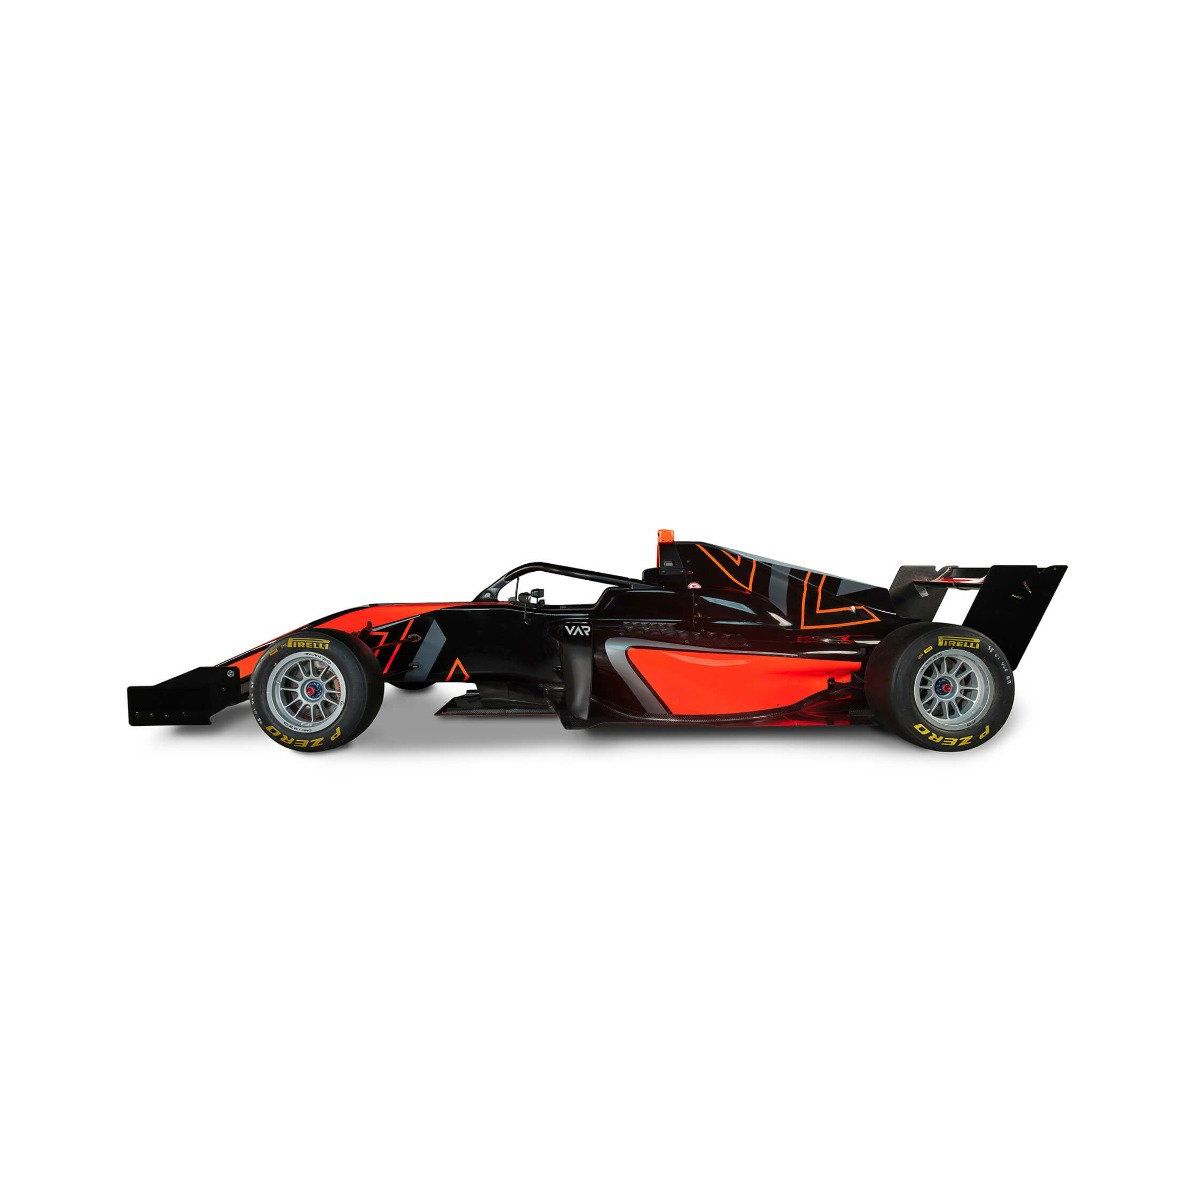 Formula 3 - Lower side view